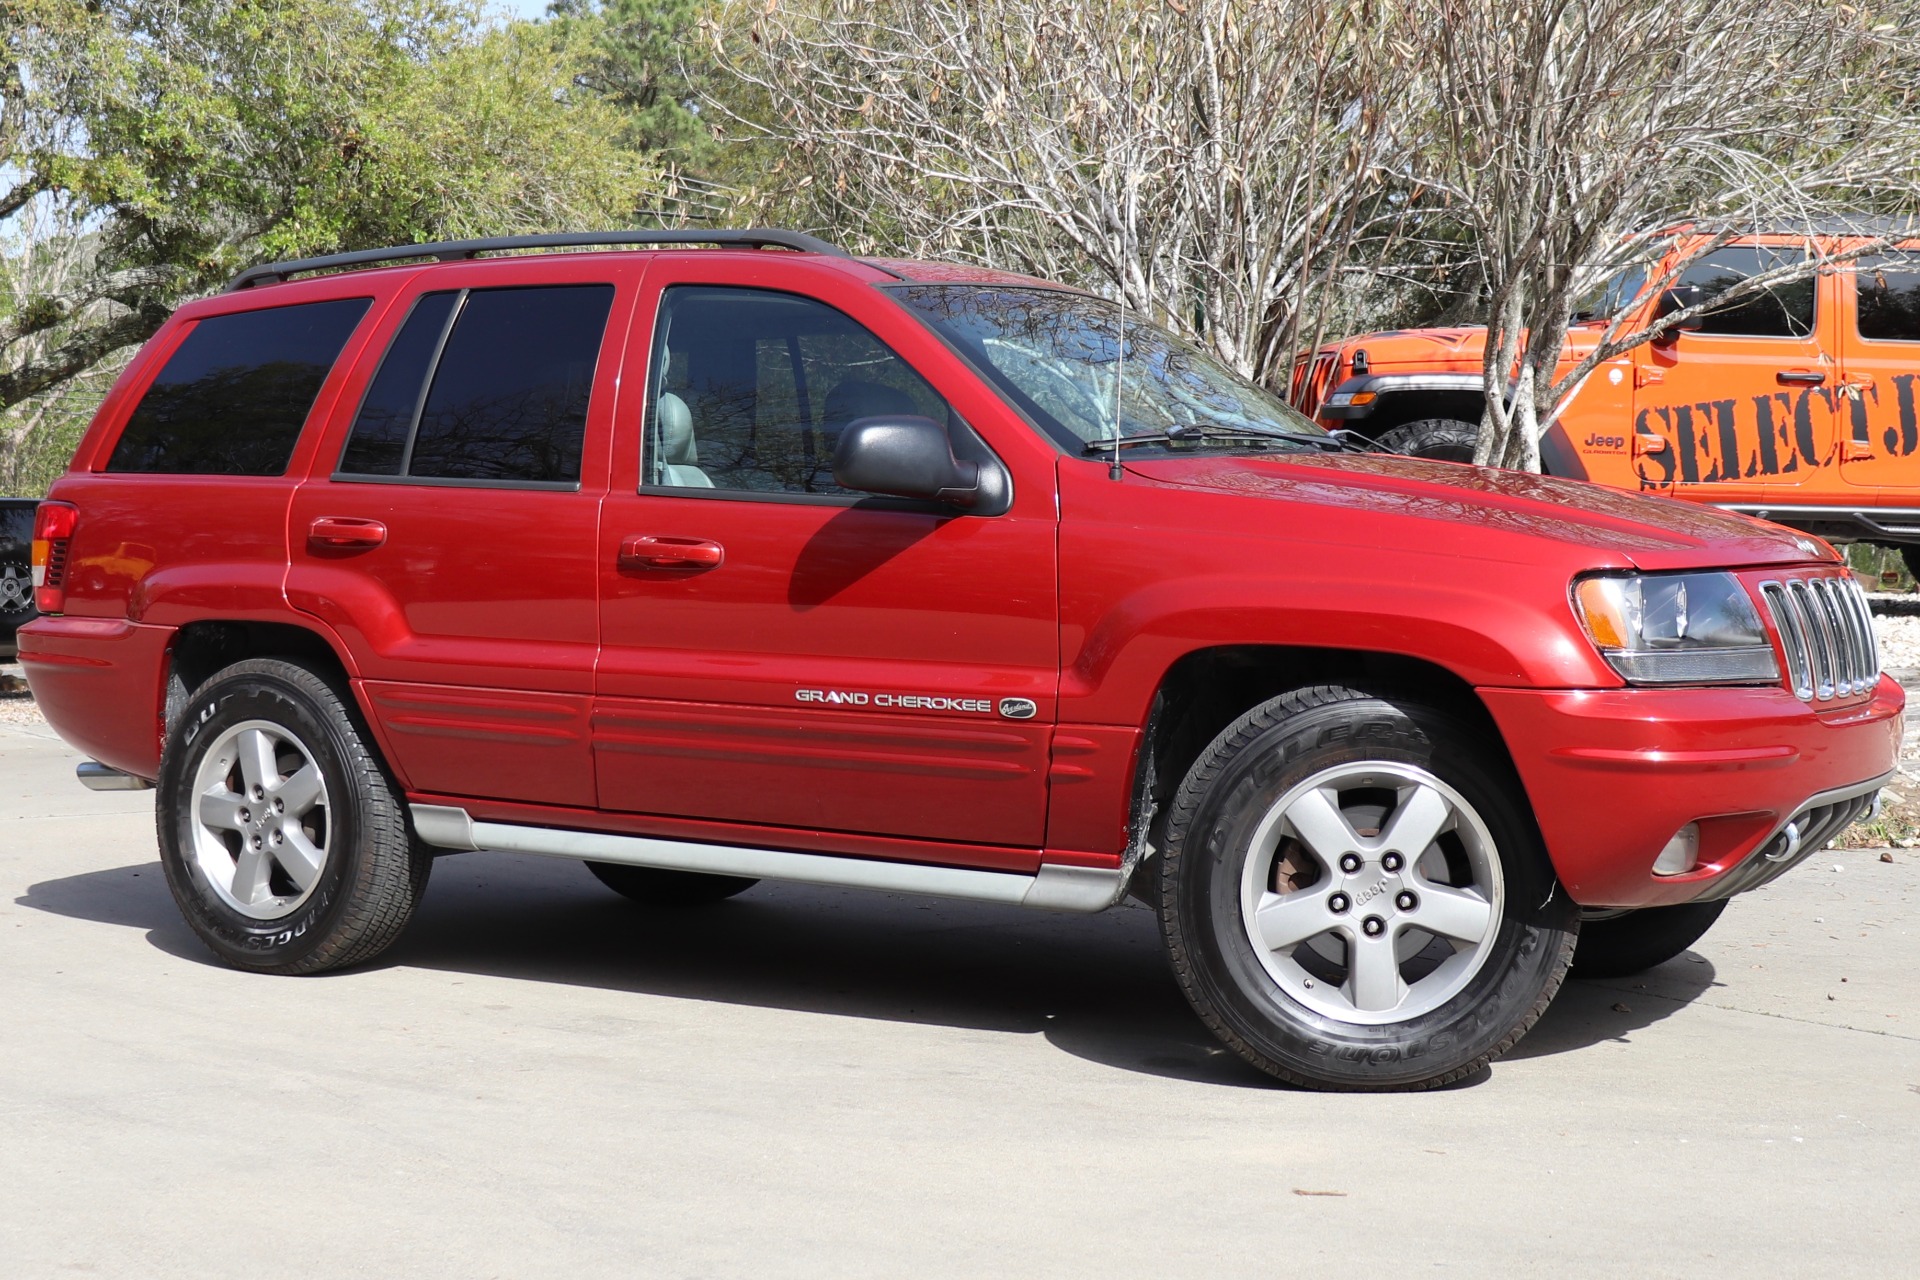 Used 2002 Jeep Grand Cherokee Overland For Sale ($10,995) | Select Jeeps  Inc. Stock #283016